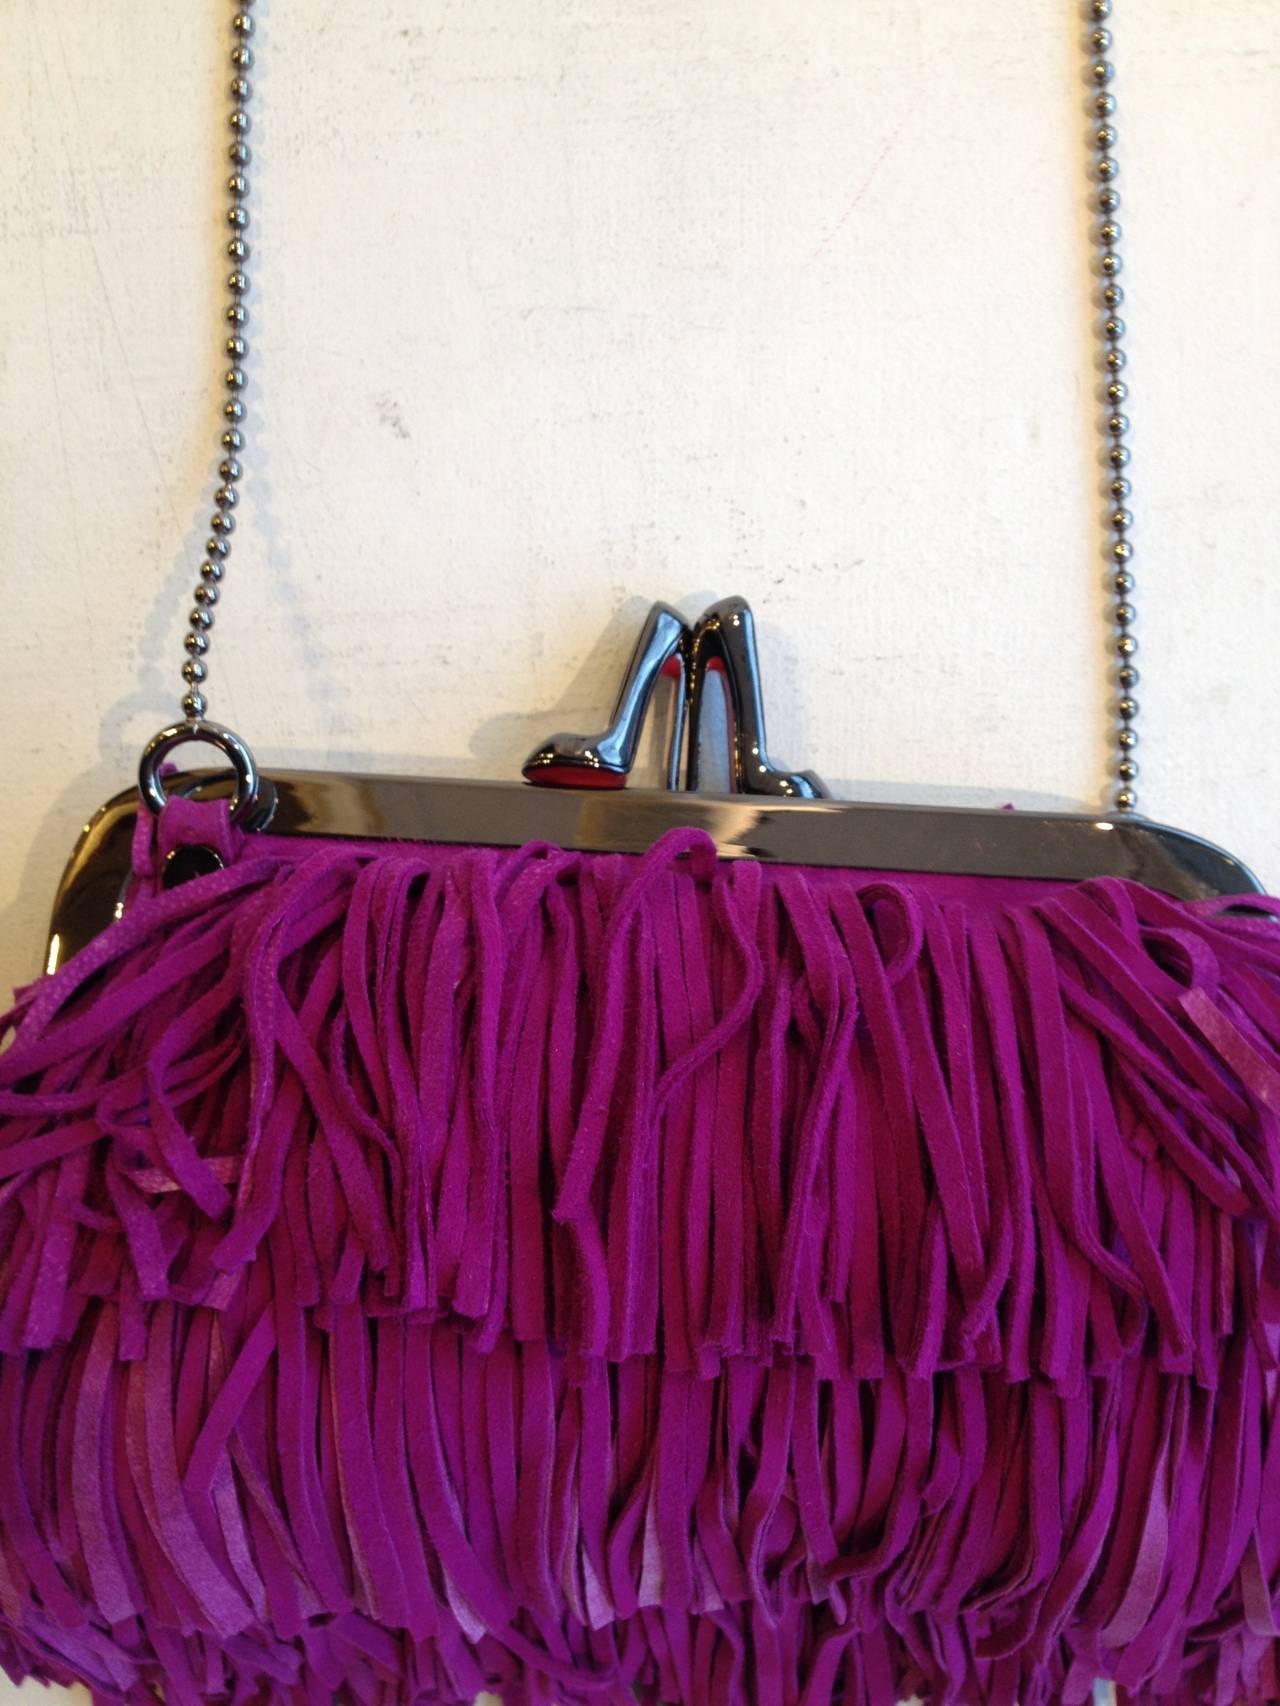 The perfect bag for any Louboutin devotee - covered in a cascade of bold orchid purple fringe, it has the same wild and fun aesthetic that Christian Louboutin is known for. The fine pewter-toned chain strap drops 18.5 inches from the top to the top